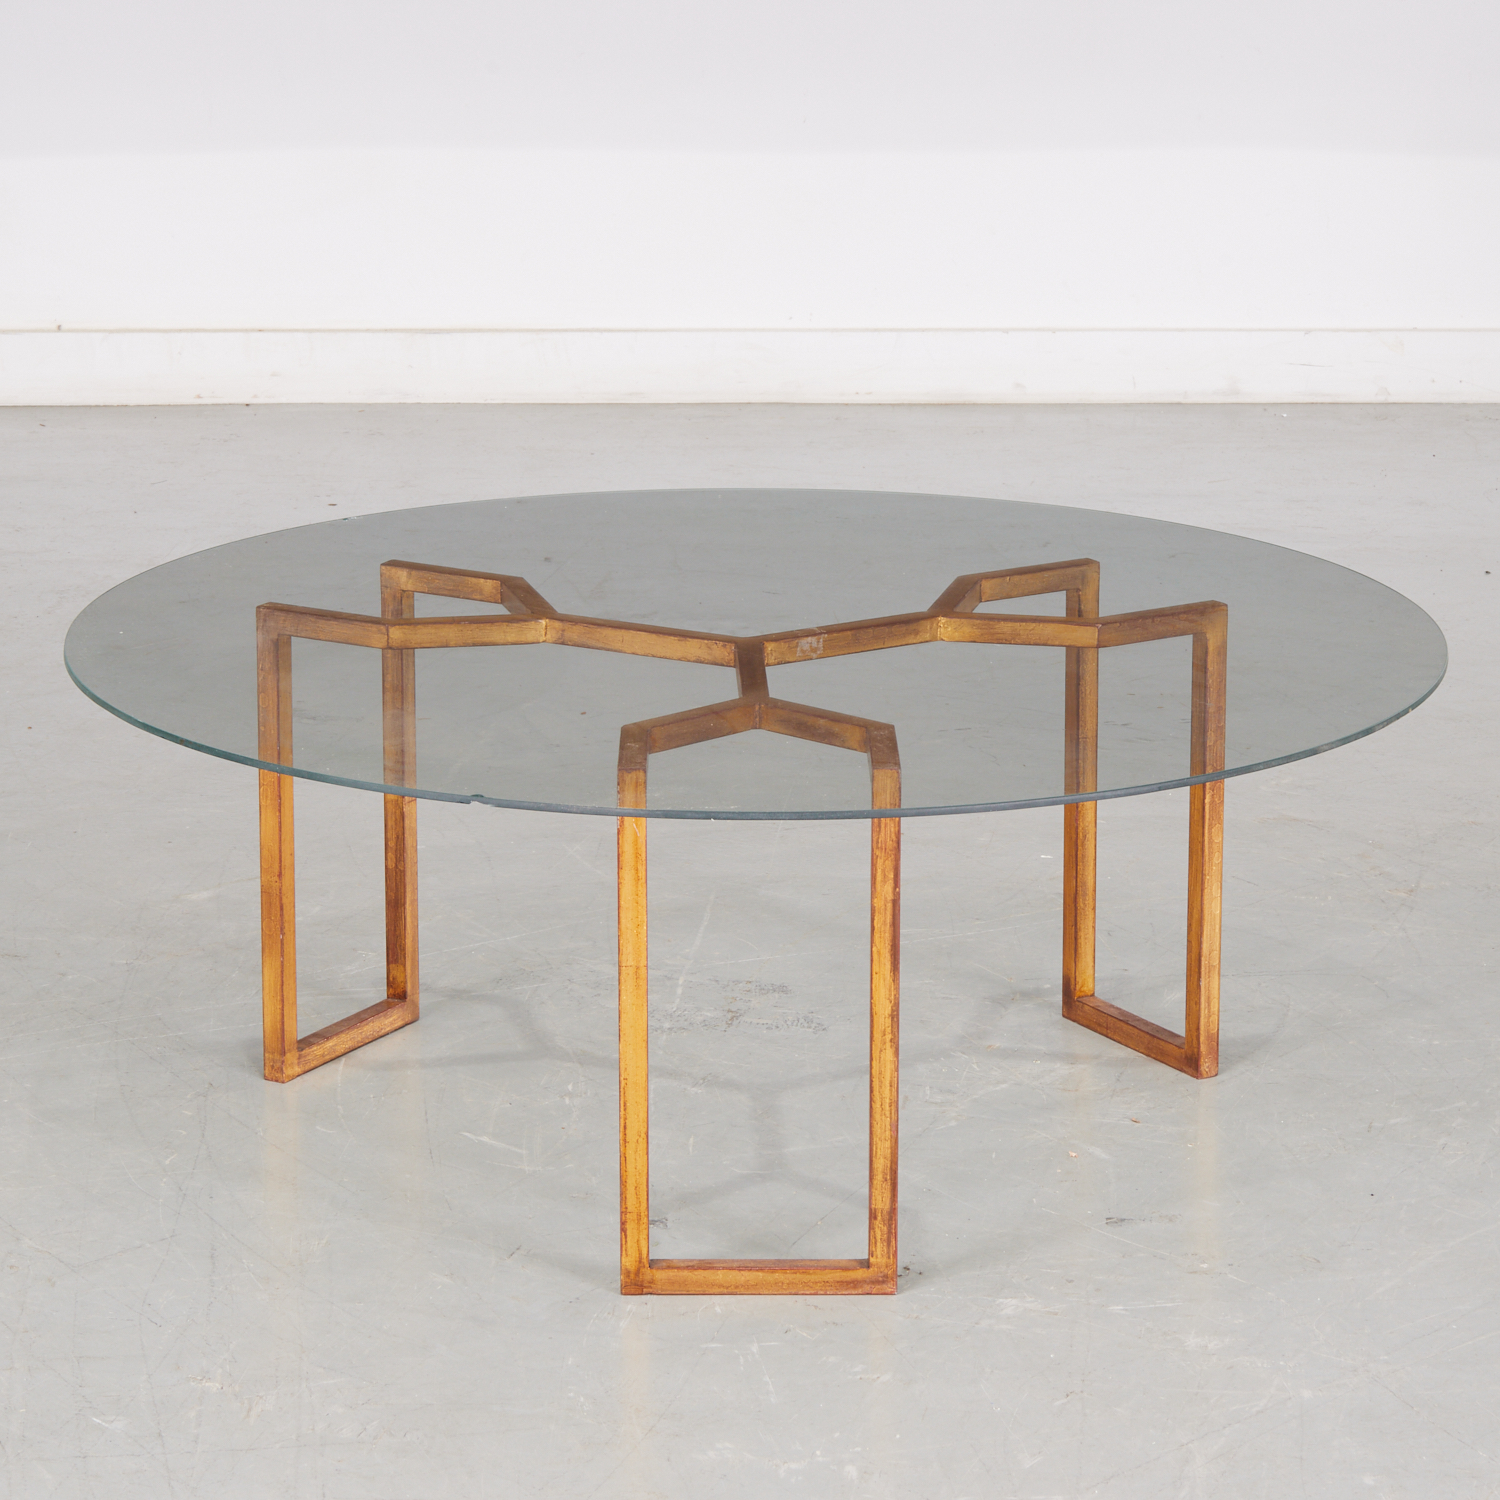 JEAN ROYERE (STYLE), COFFEE TABLE